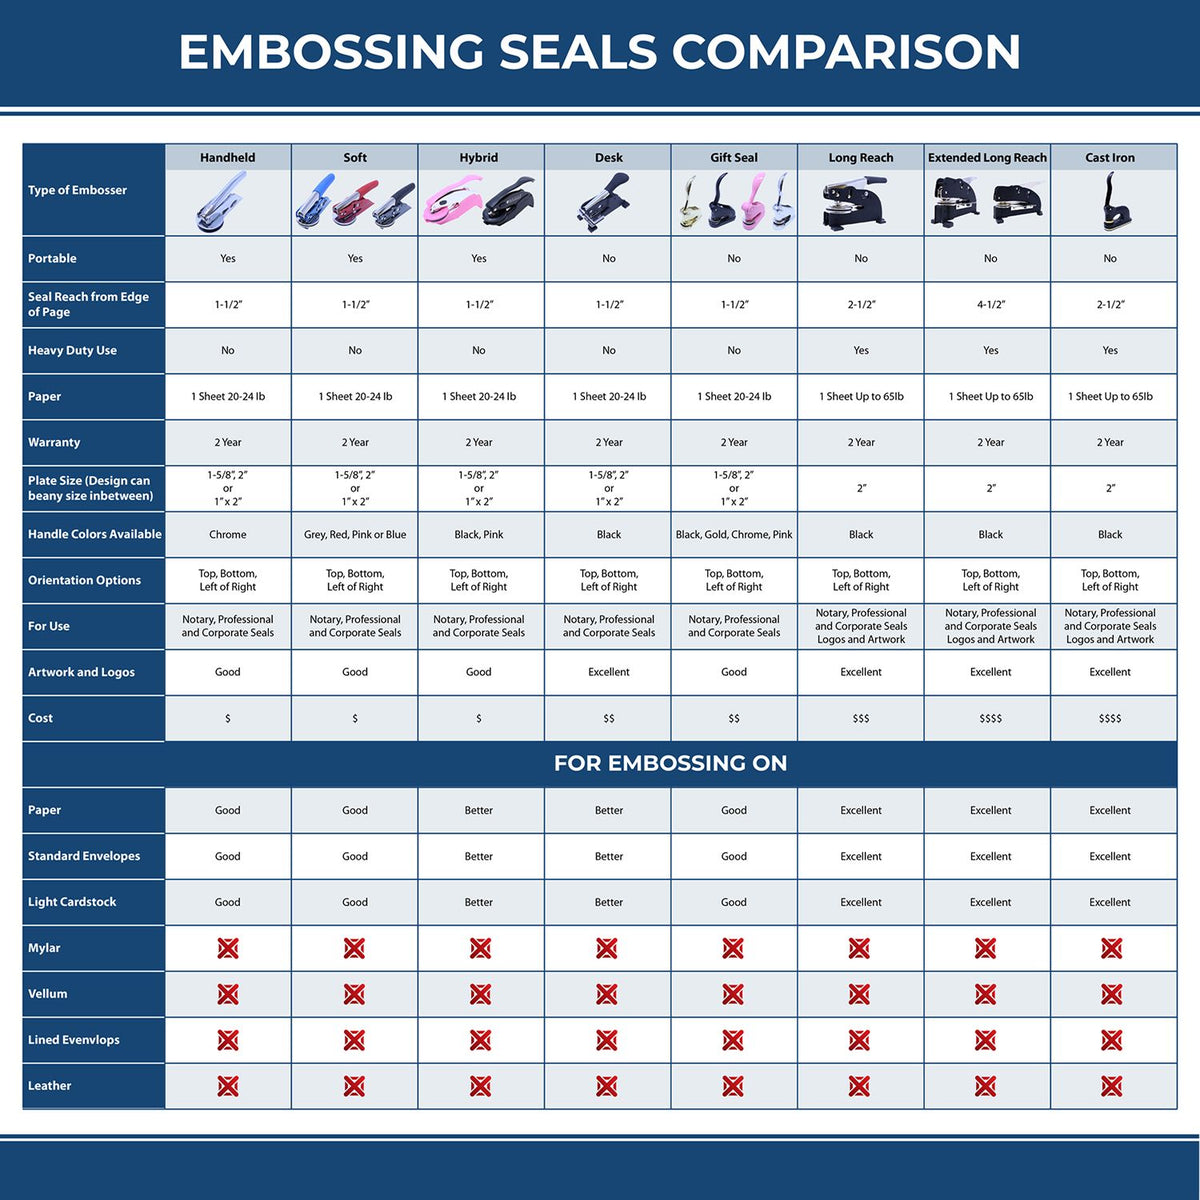 A comparison chart for the different types of mount models available for the Long Reach Louisiana Land Surveyor Seal.